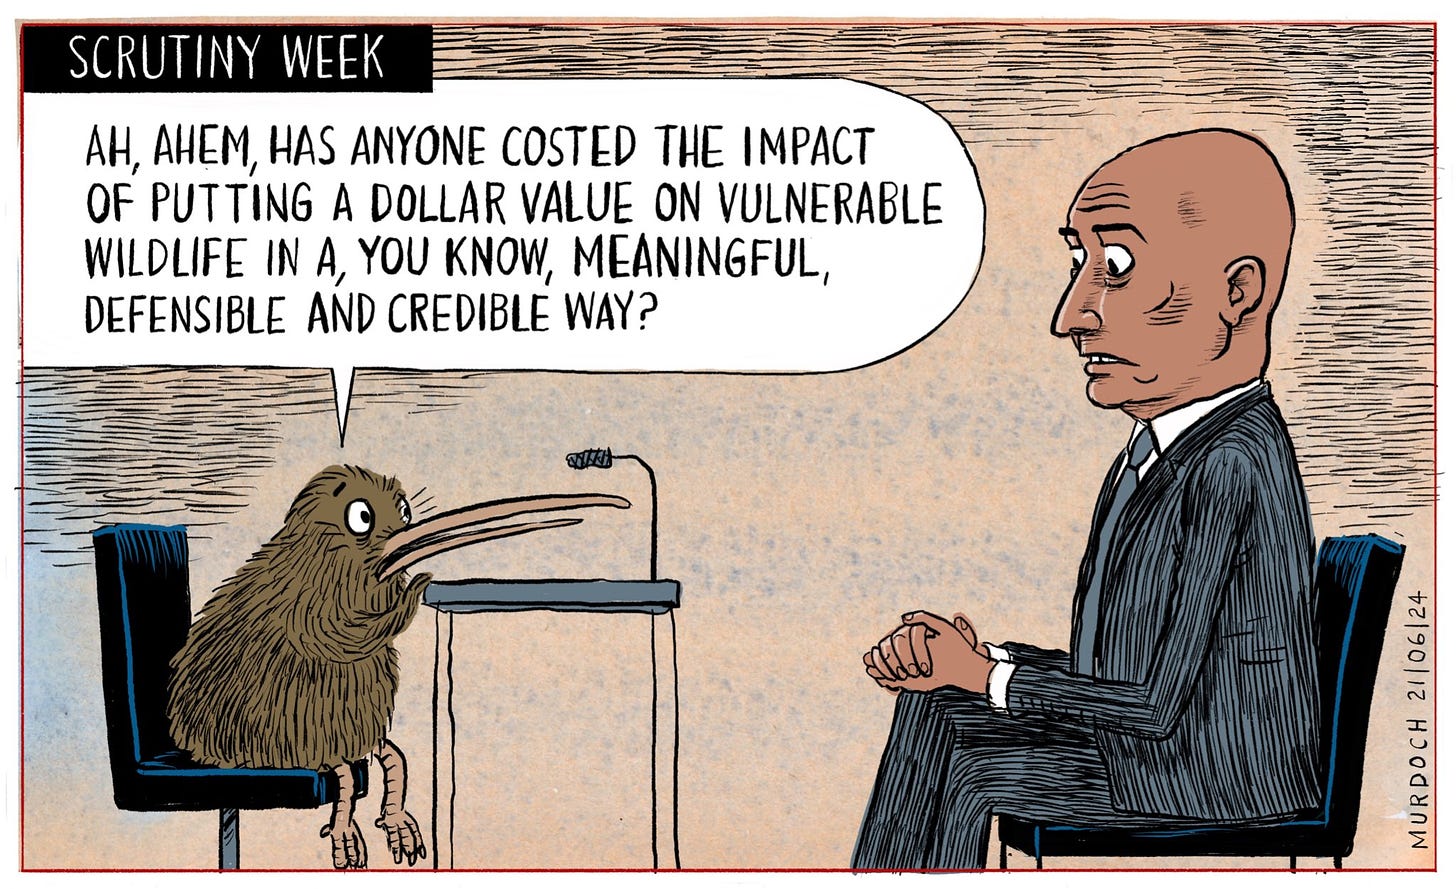 Cartoon. Title: Scrutiny Week. A kiwi, as in the bird, asks Minister for Conservation Tama Potaka “Ah, ahem, has anyone costed the impact of putting a dollar value on vulnerable wildlife in a, you know, meaningful, defensible and credible way?”